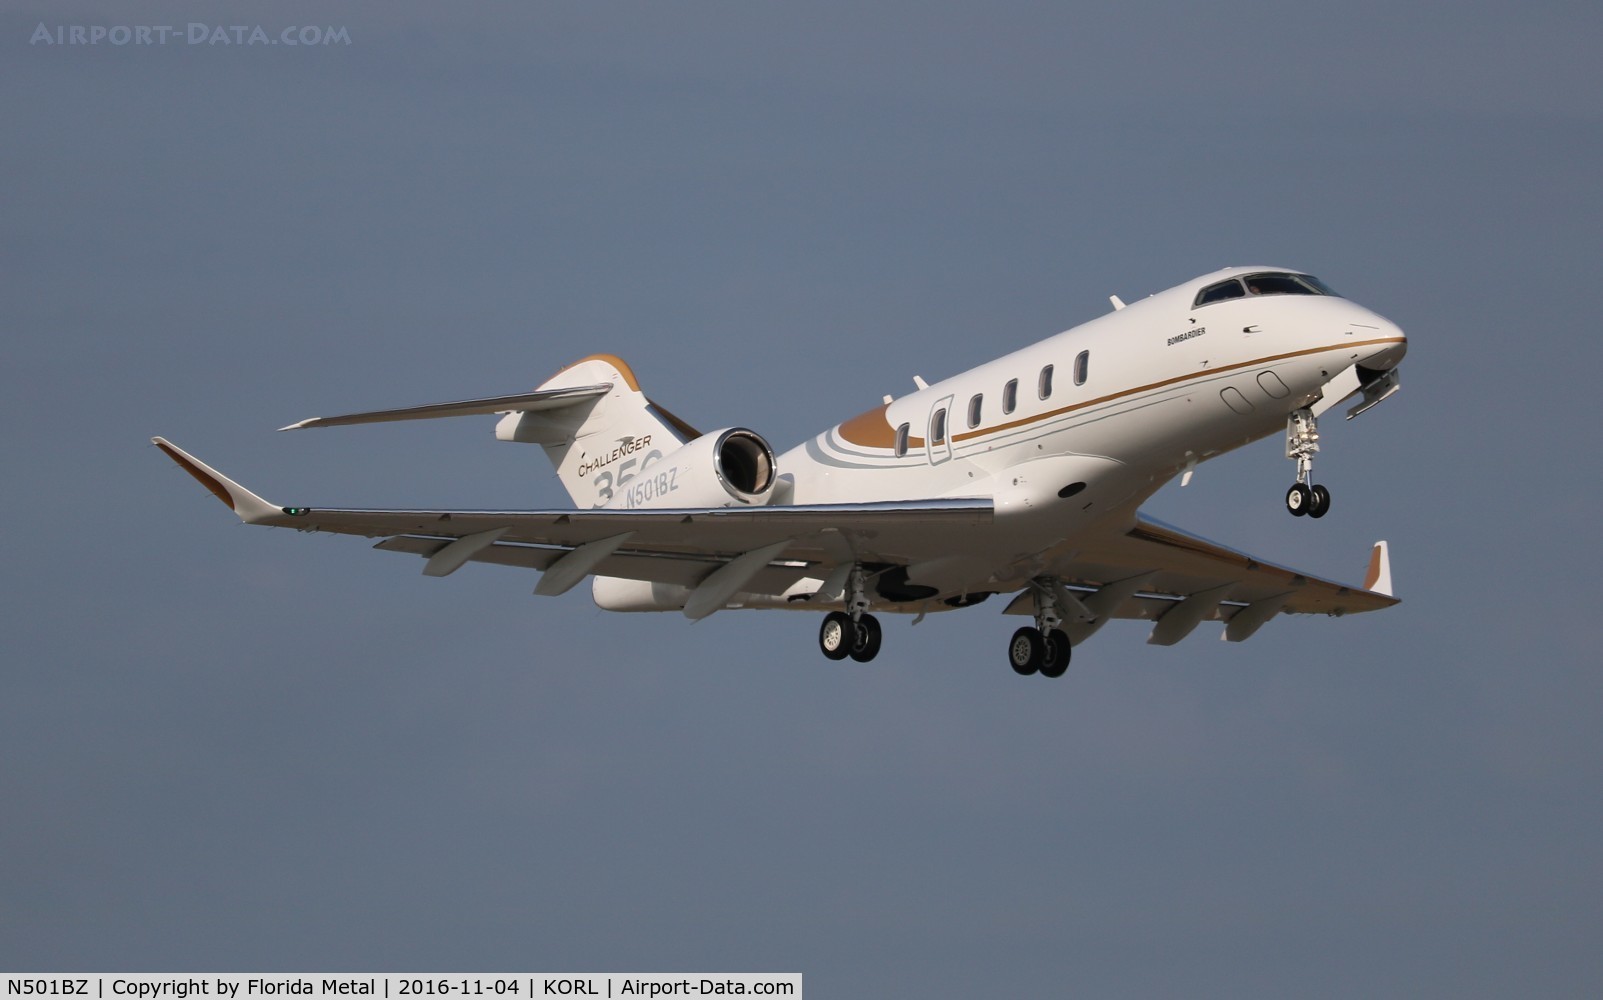 N501BZ, 2014 Bombardier Challenger 350 (BD-100-1A10) C/N 20501, Challenger 350 zx